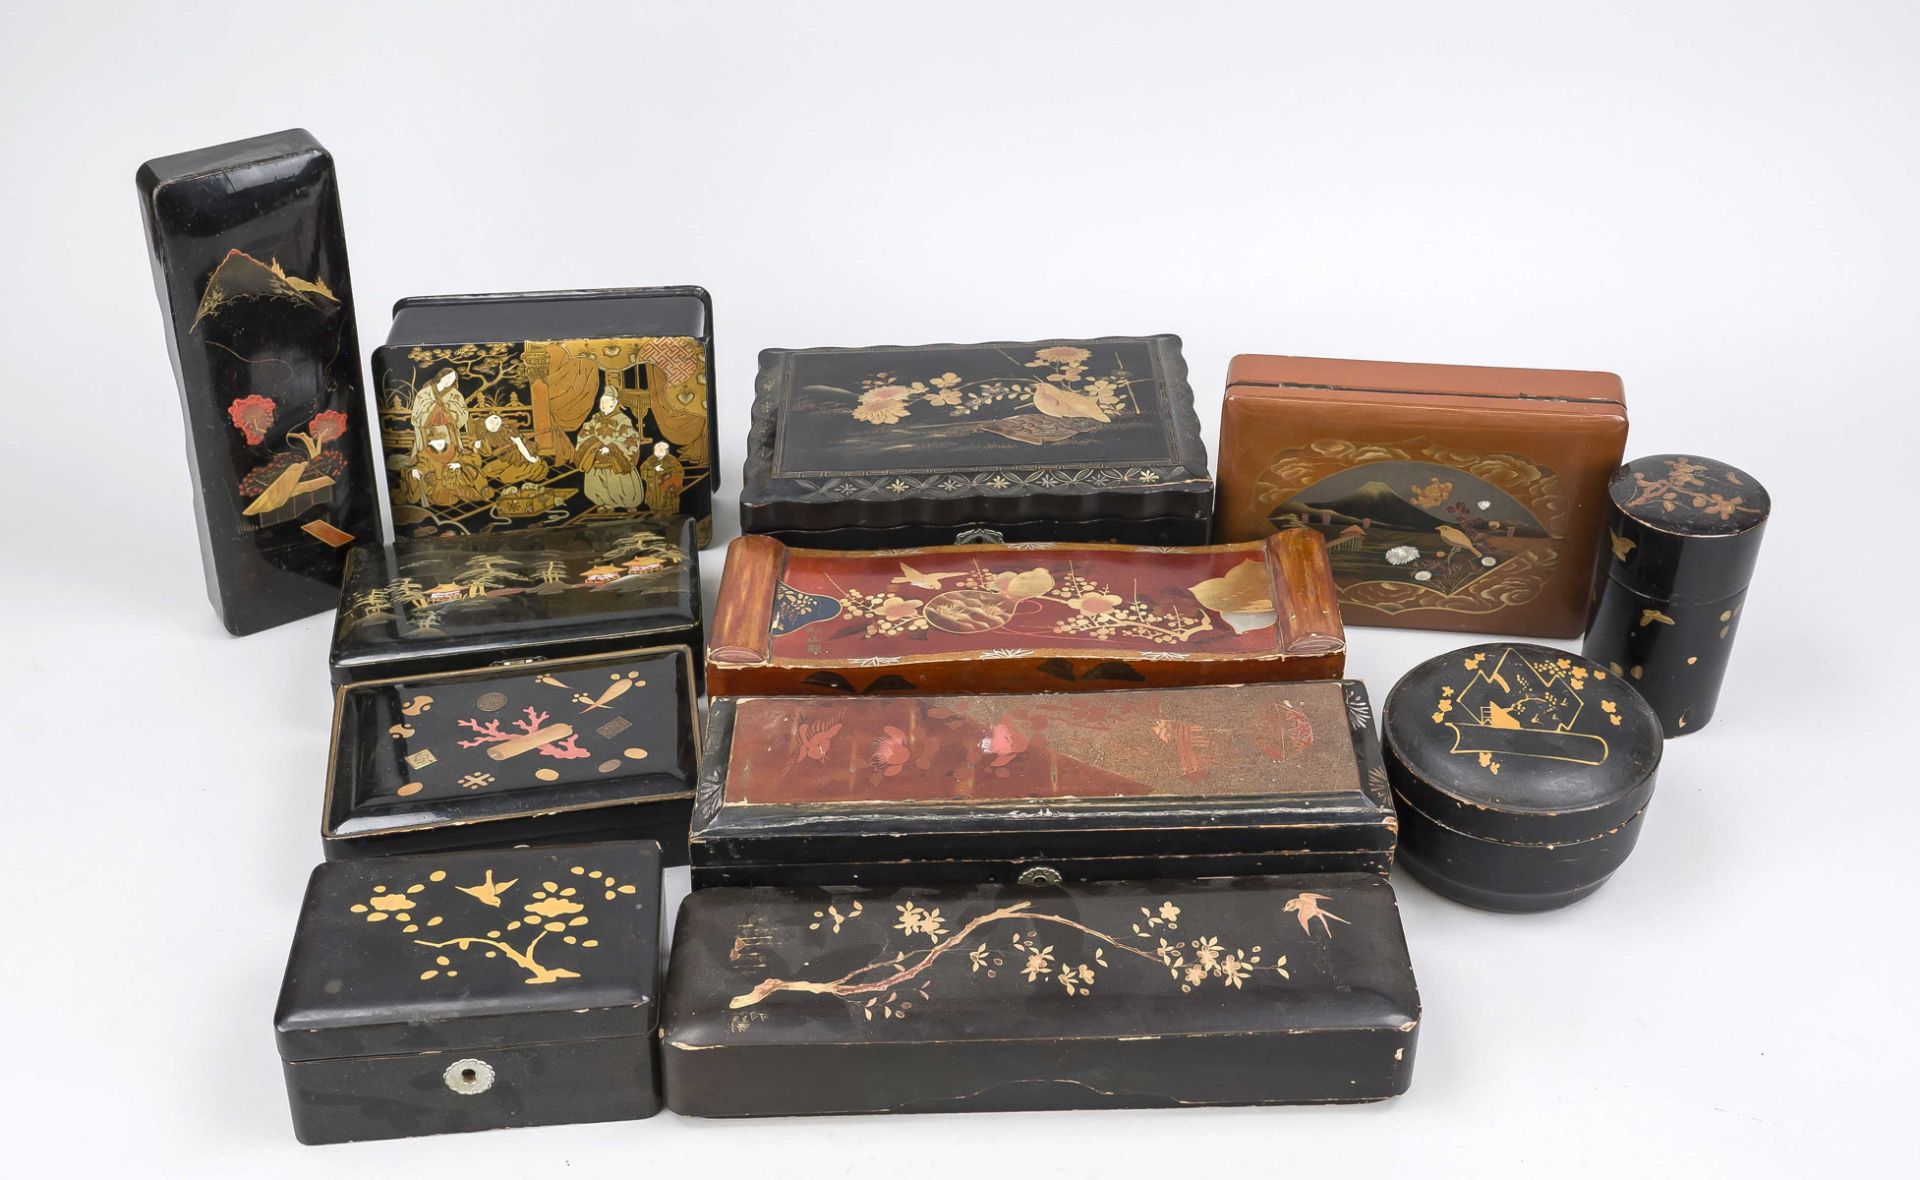 Mixed lot of 12 lacquer boxes, Japan/China 19th/20th century, partly rubbed and slightly chipped, up